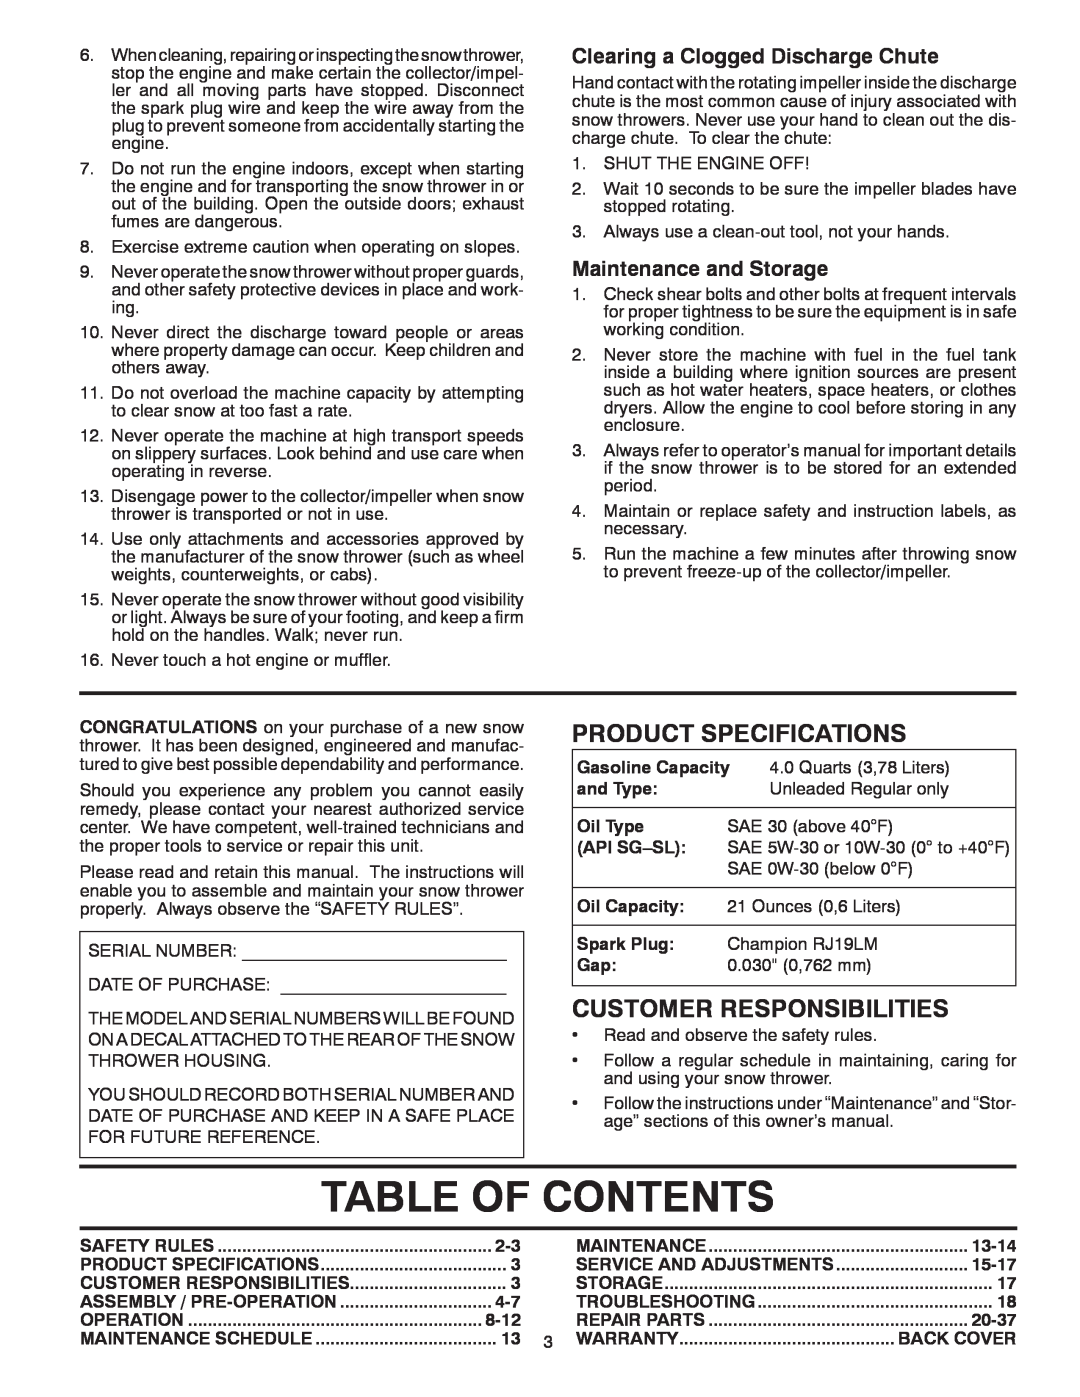 Poulan 422073 Table Of Contents, Product Specifications, Customer Responsibilities, Clearing a Clogged Discharge Chute 